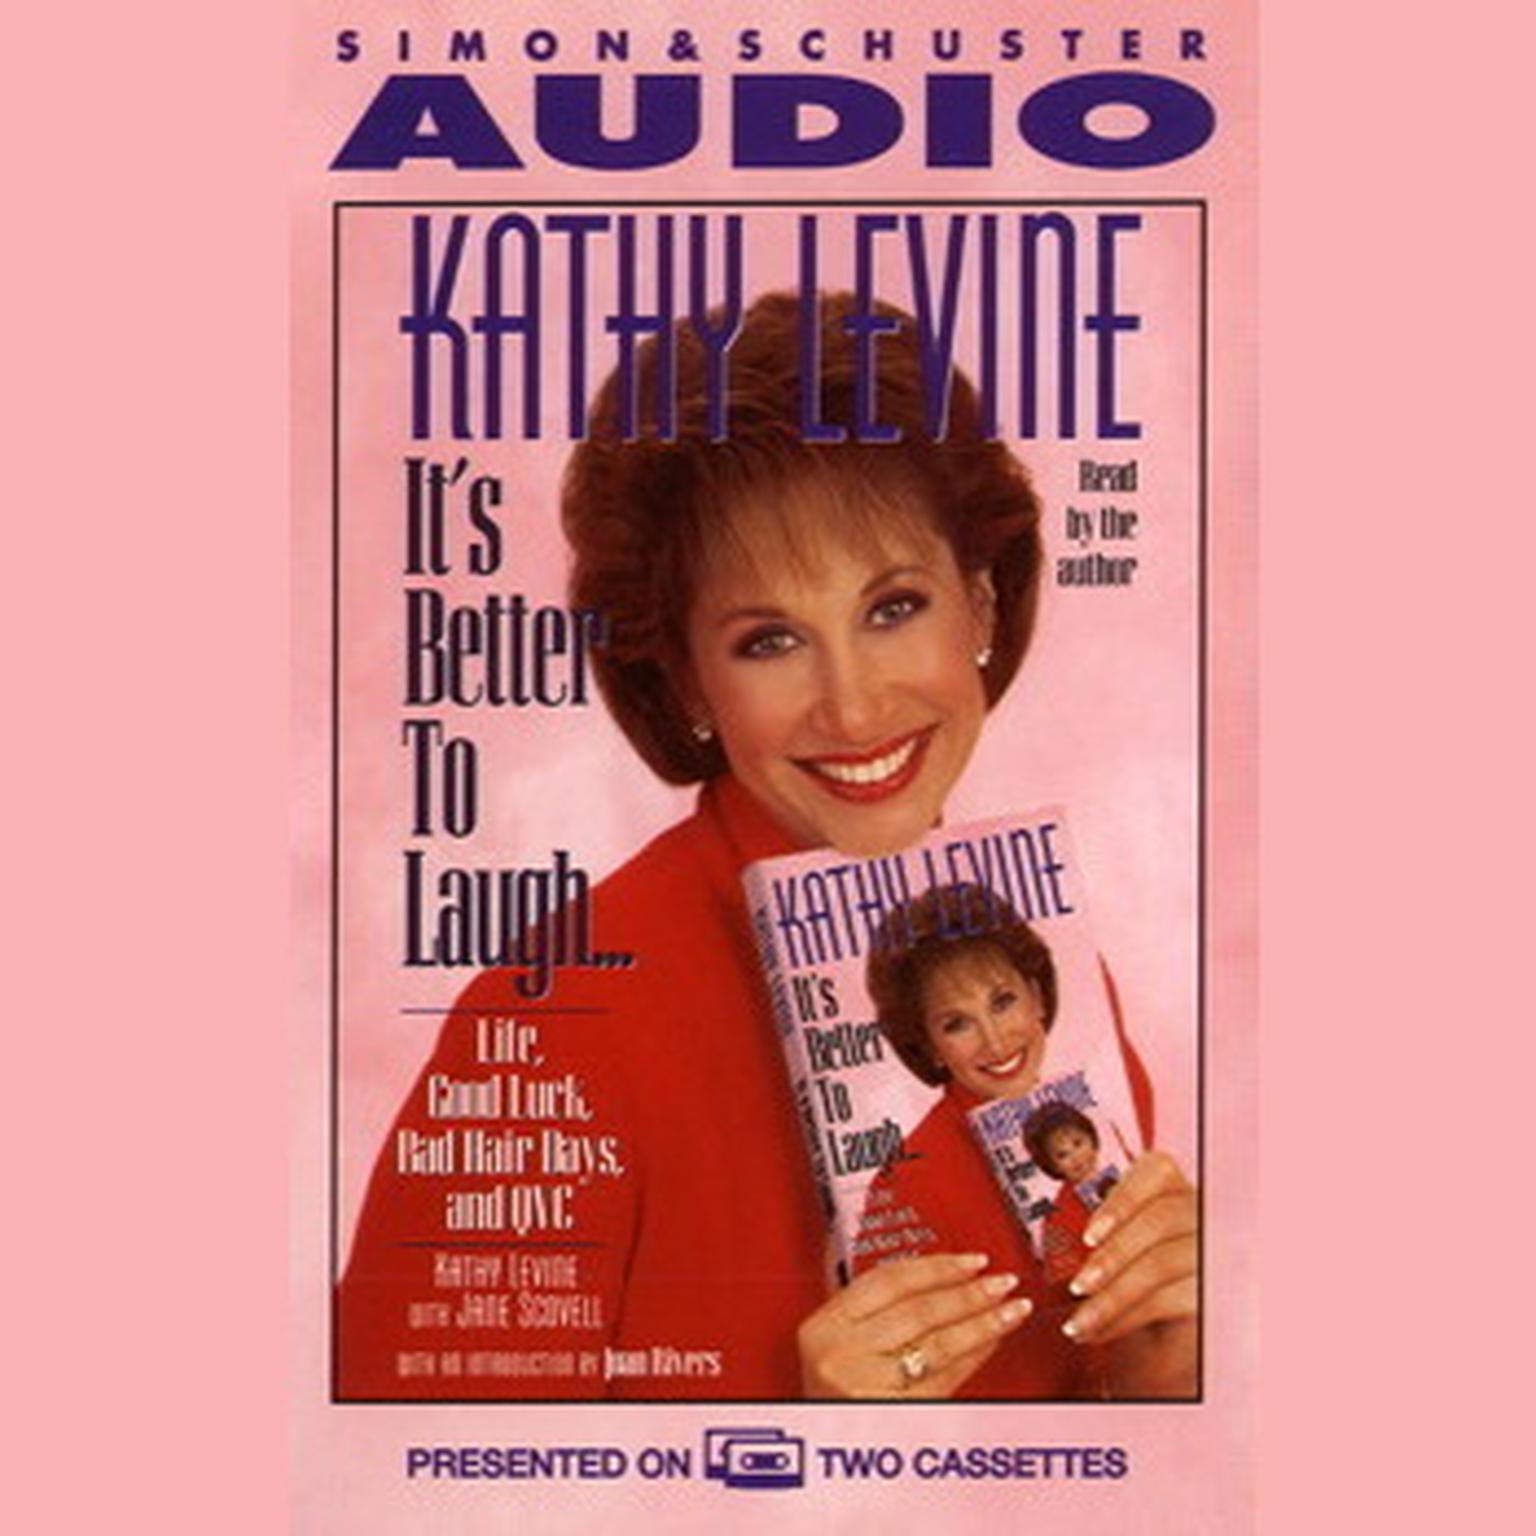 Its Better to Laugh…Life Good Luck Bad Hair Days & QVC (Abridged): Americas Top Learning Expert Shows How Every Child Can Succeed Audiobook, by Kathy Levine